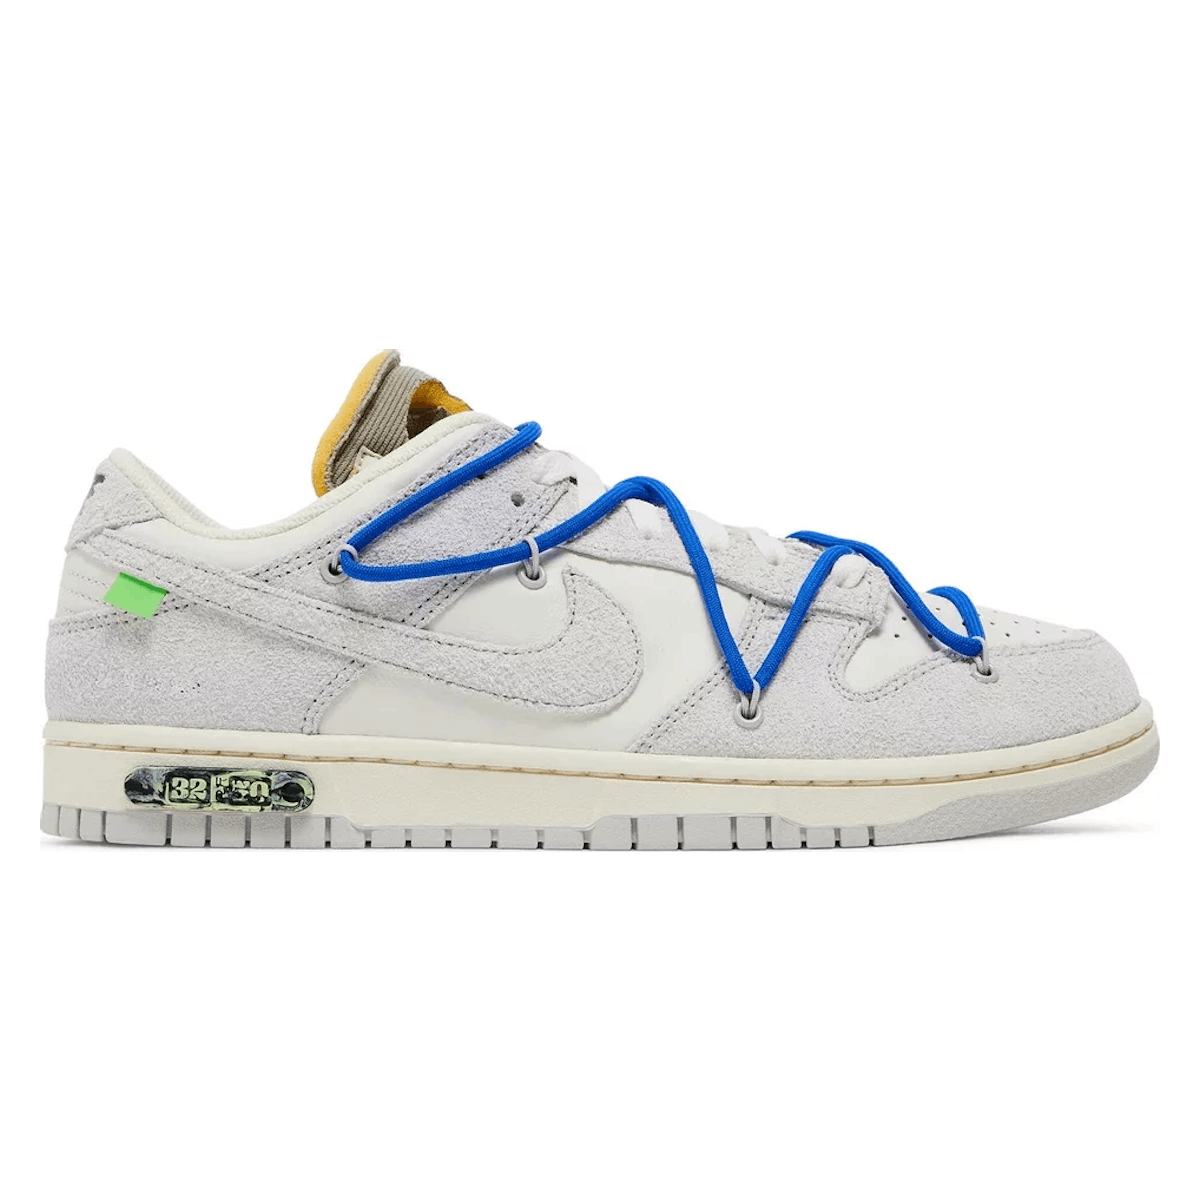 Off-White x Nike Dunk Low "Lot 32 of 50"